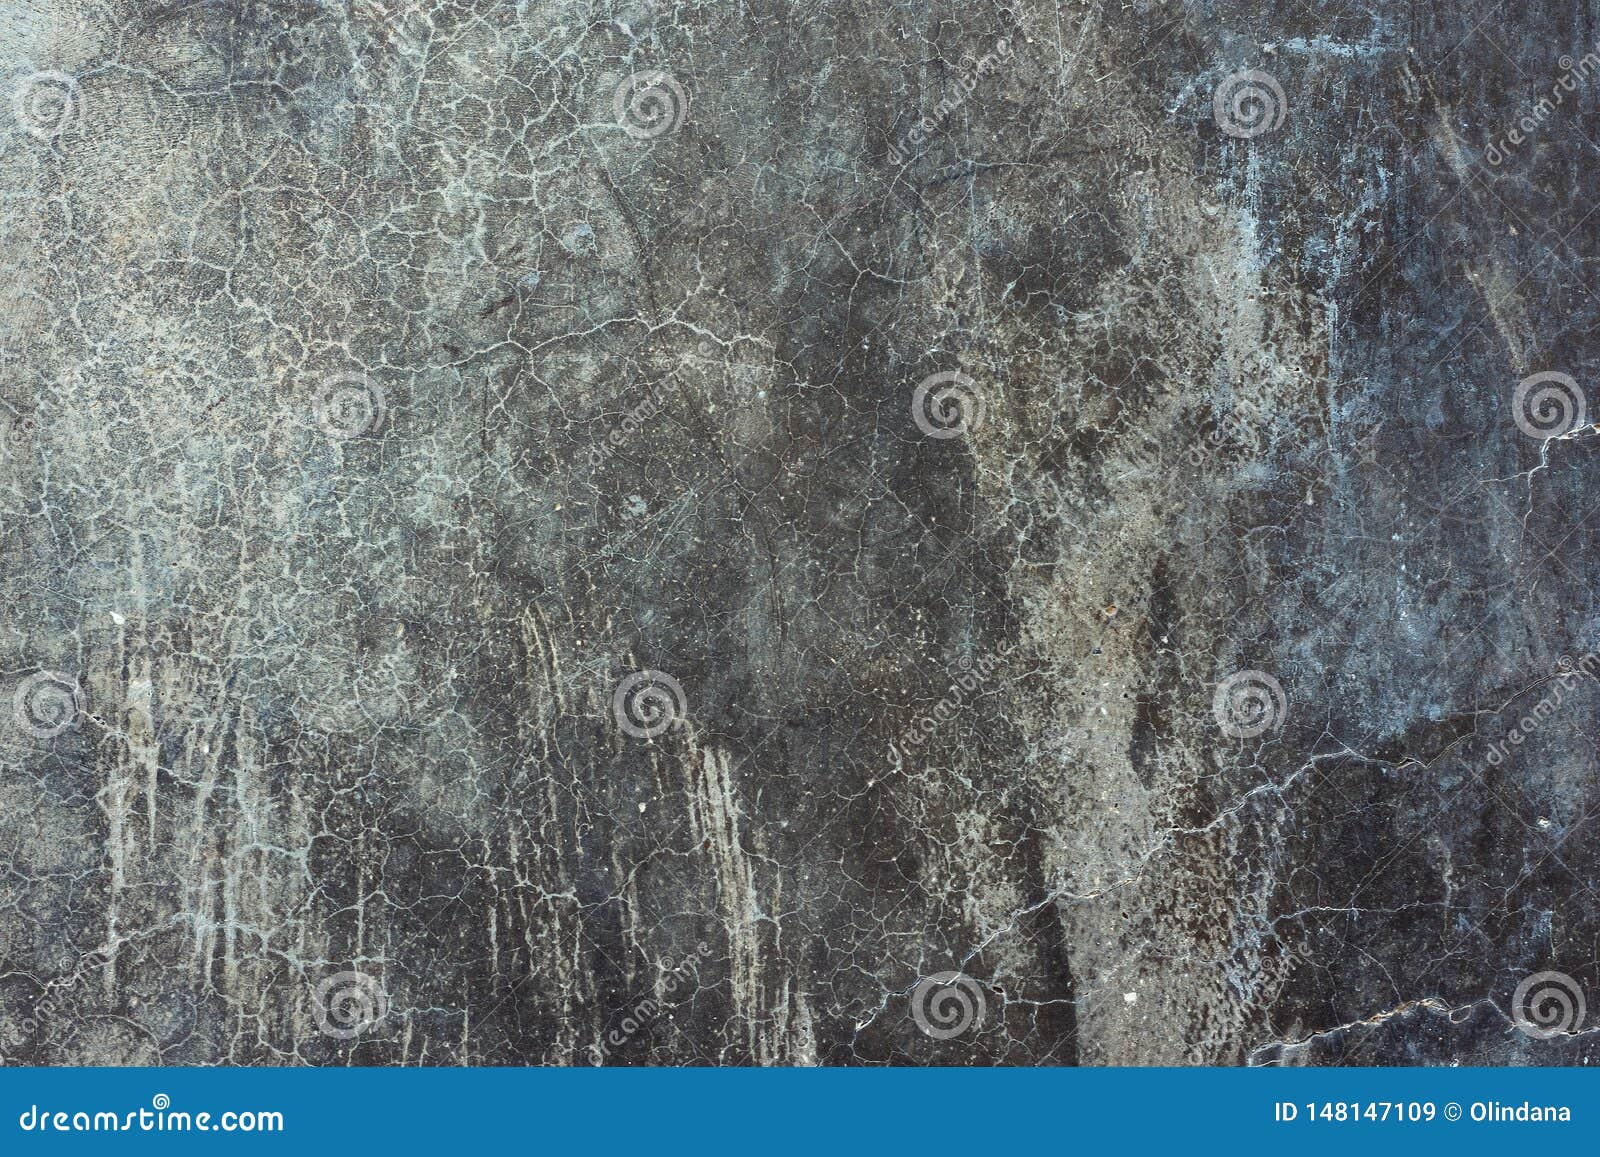 old distressed scratched cement concrete wall background with grungy texture. gradient black gray blueish colors and shades